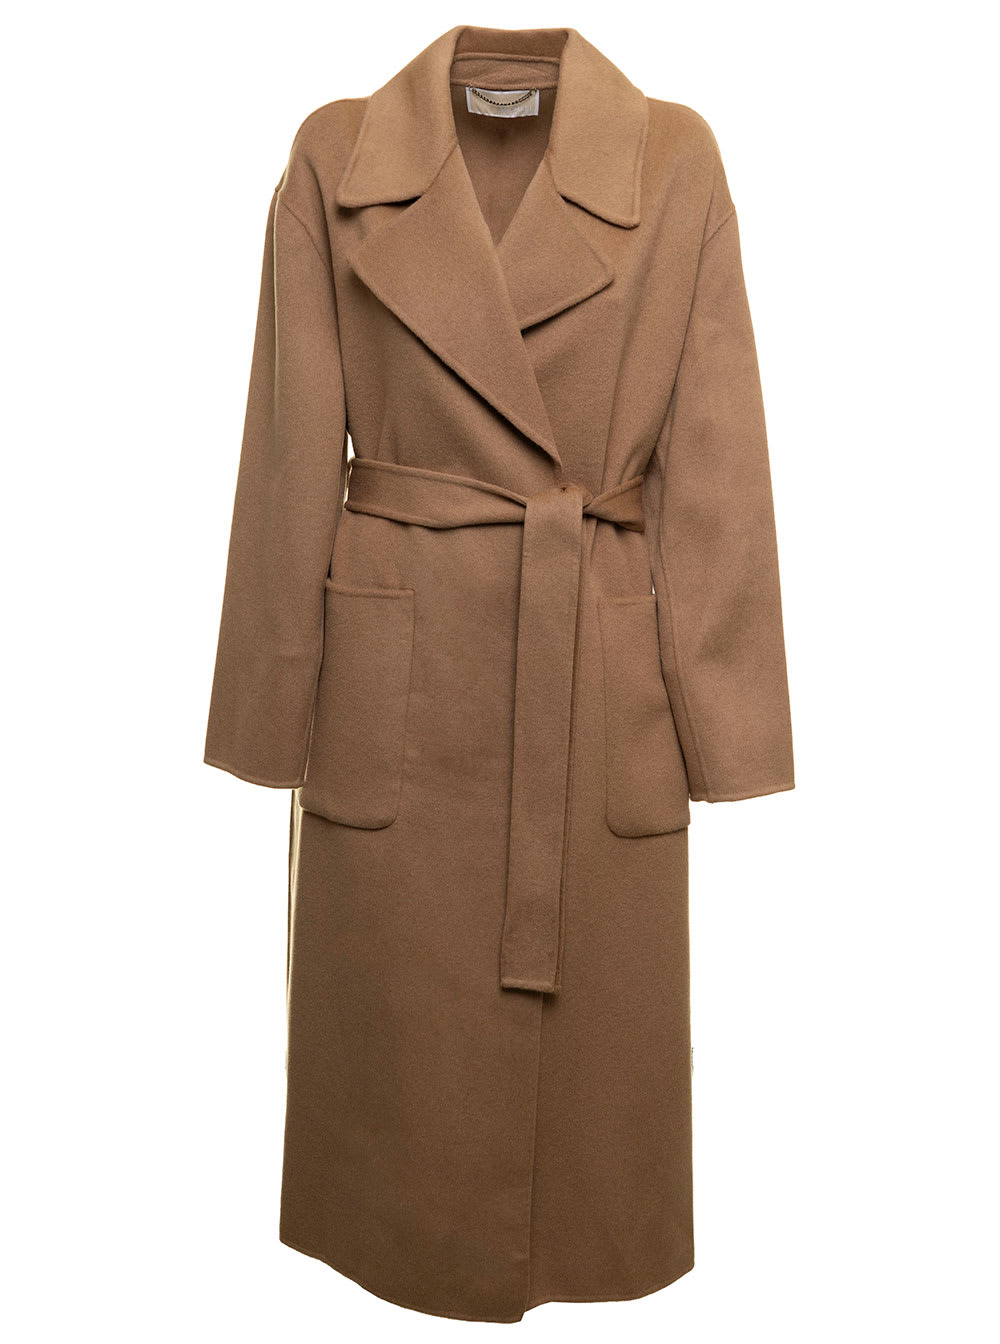 Double-breasted Camel Colored Wool Coat With Belt M Michael Kors Woman